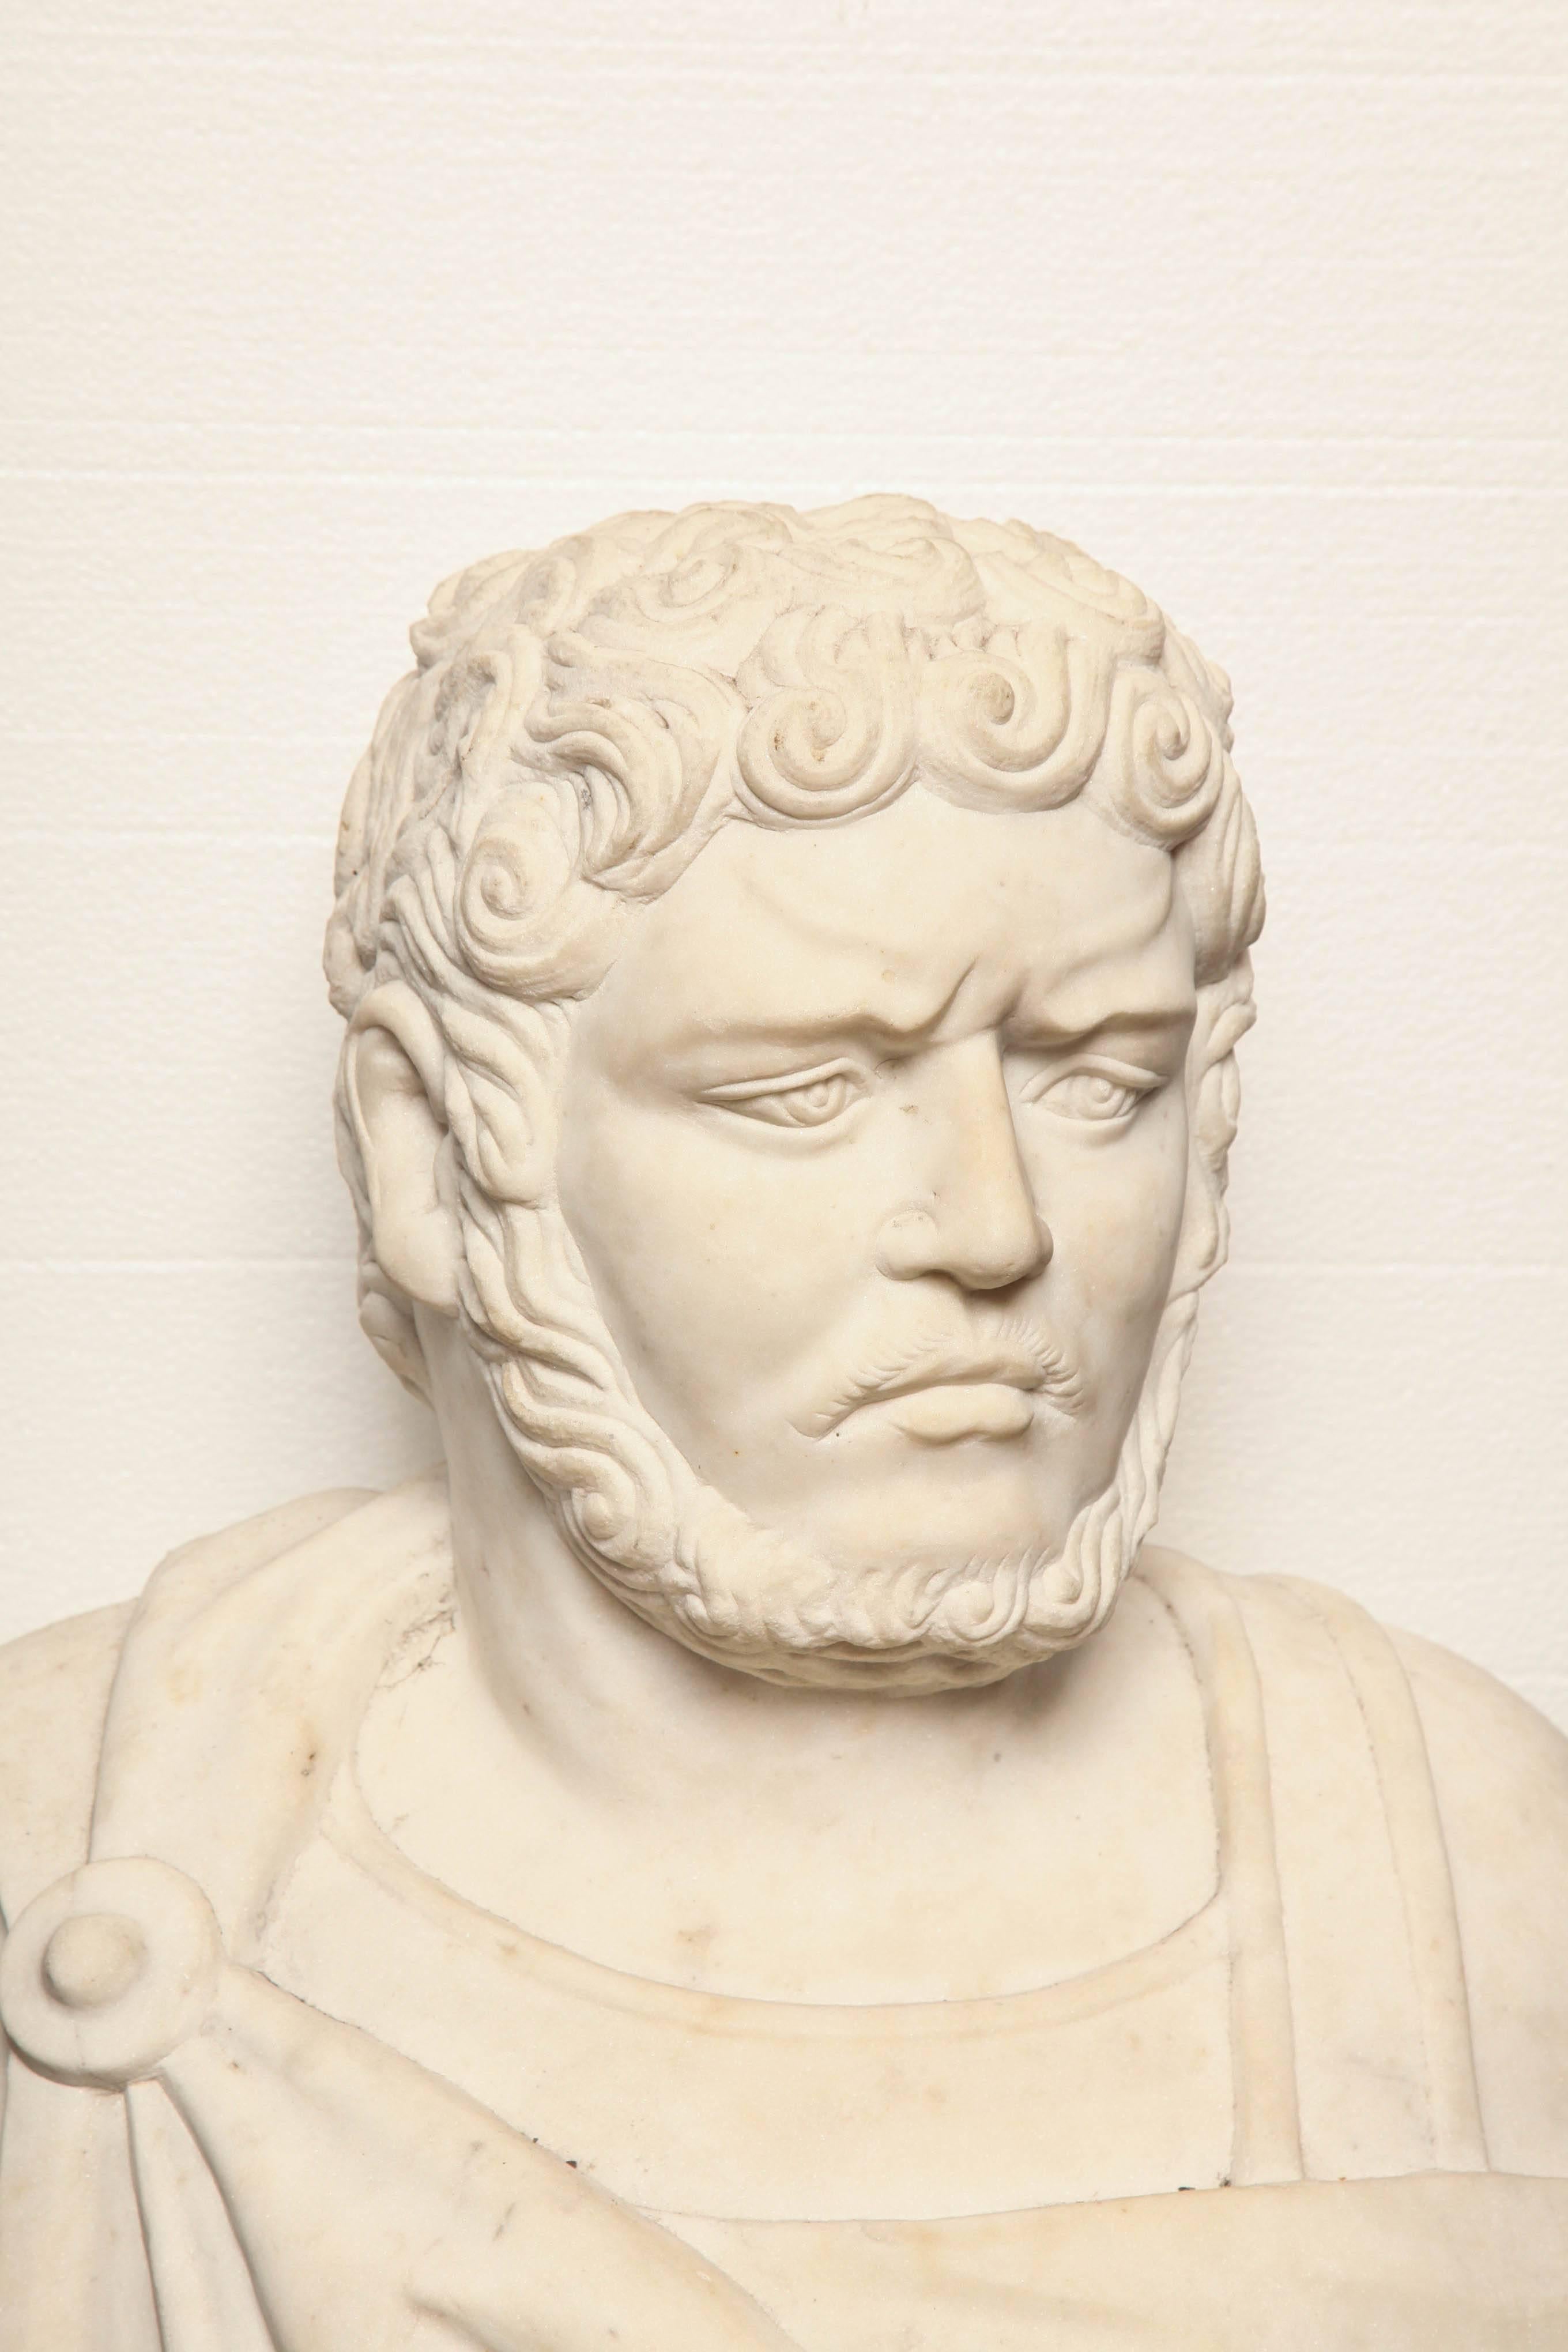 19th Century Italian Marble Bust, Possibly Caracalla